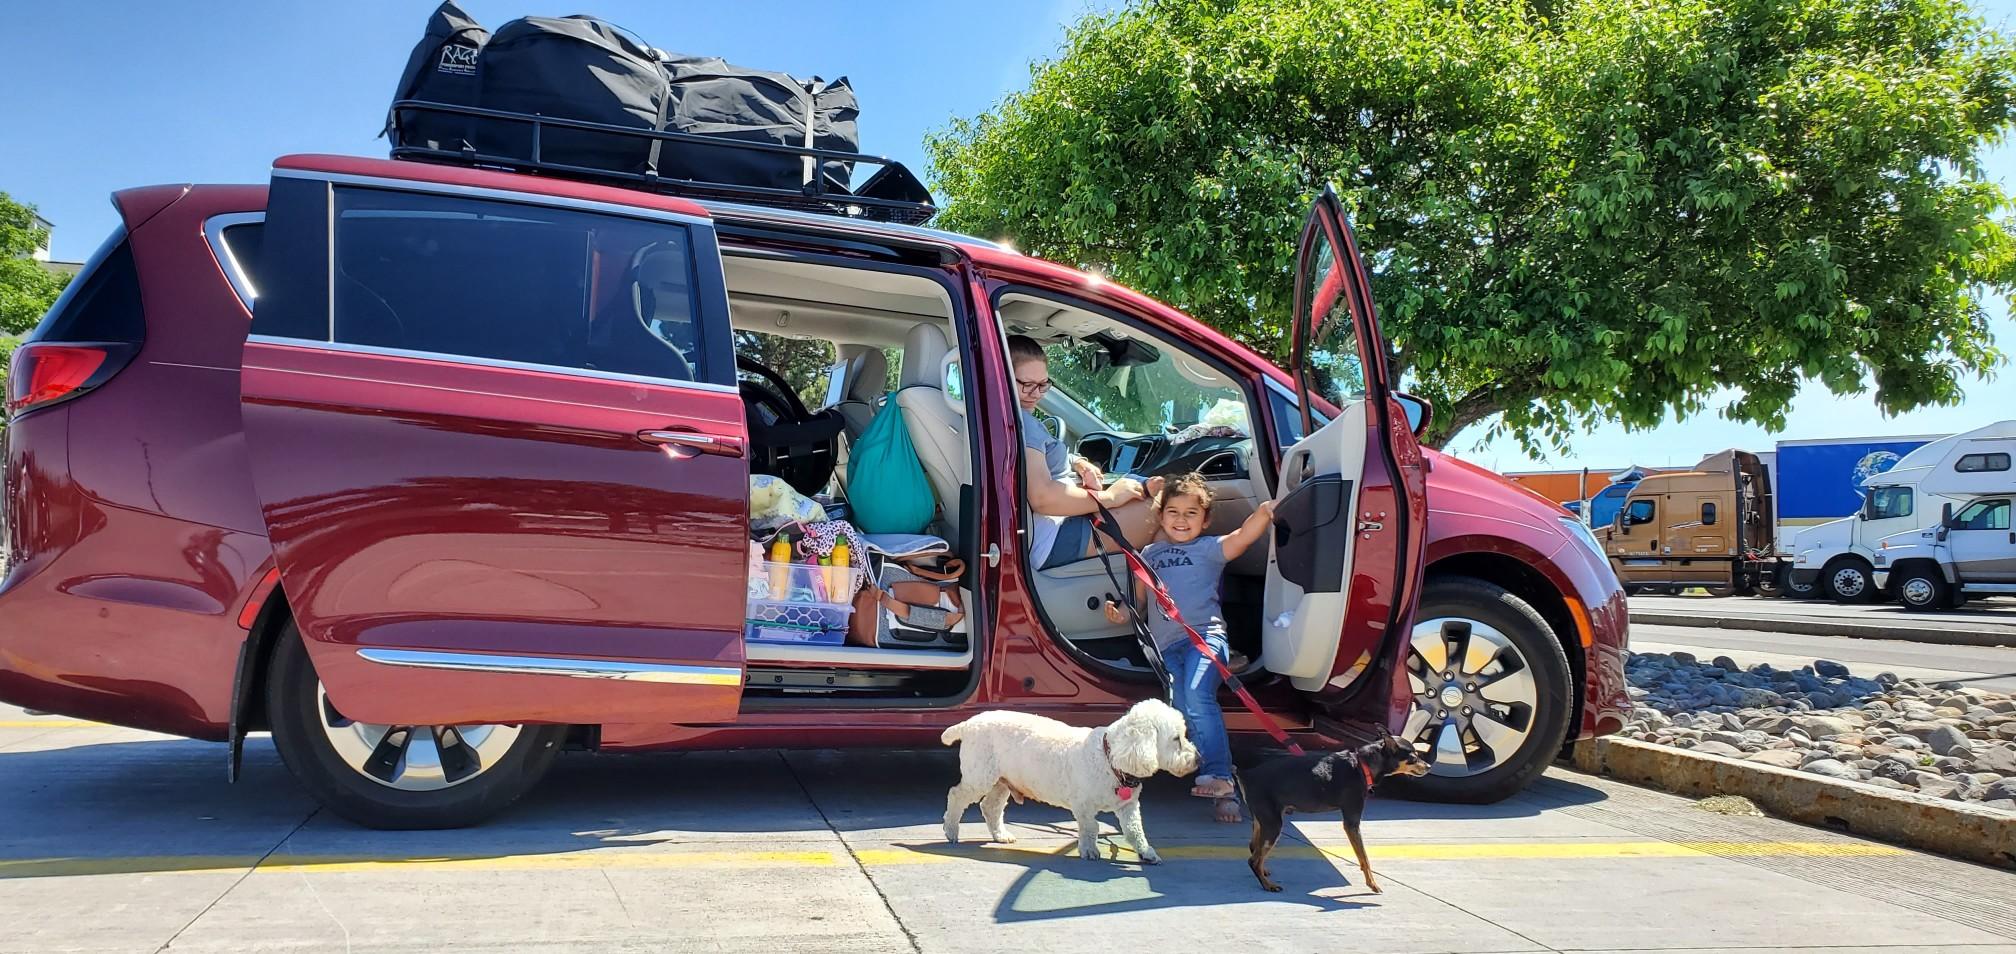 A family getting out of a minivan.